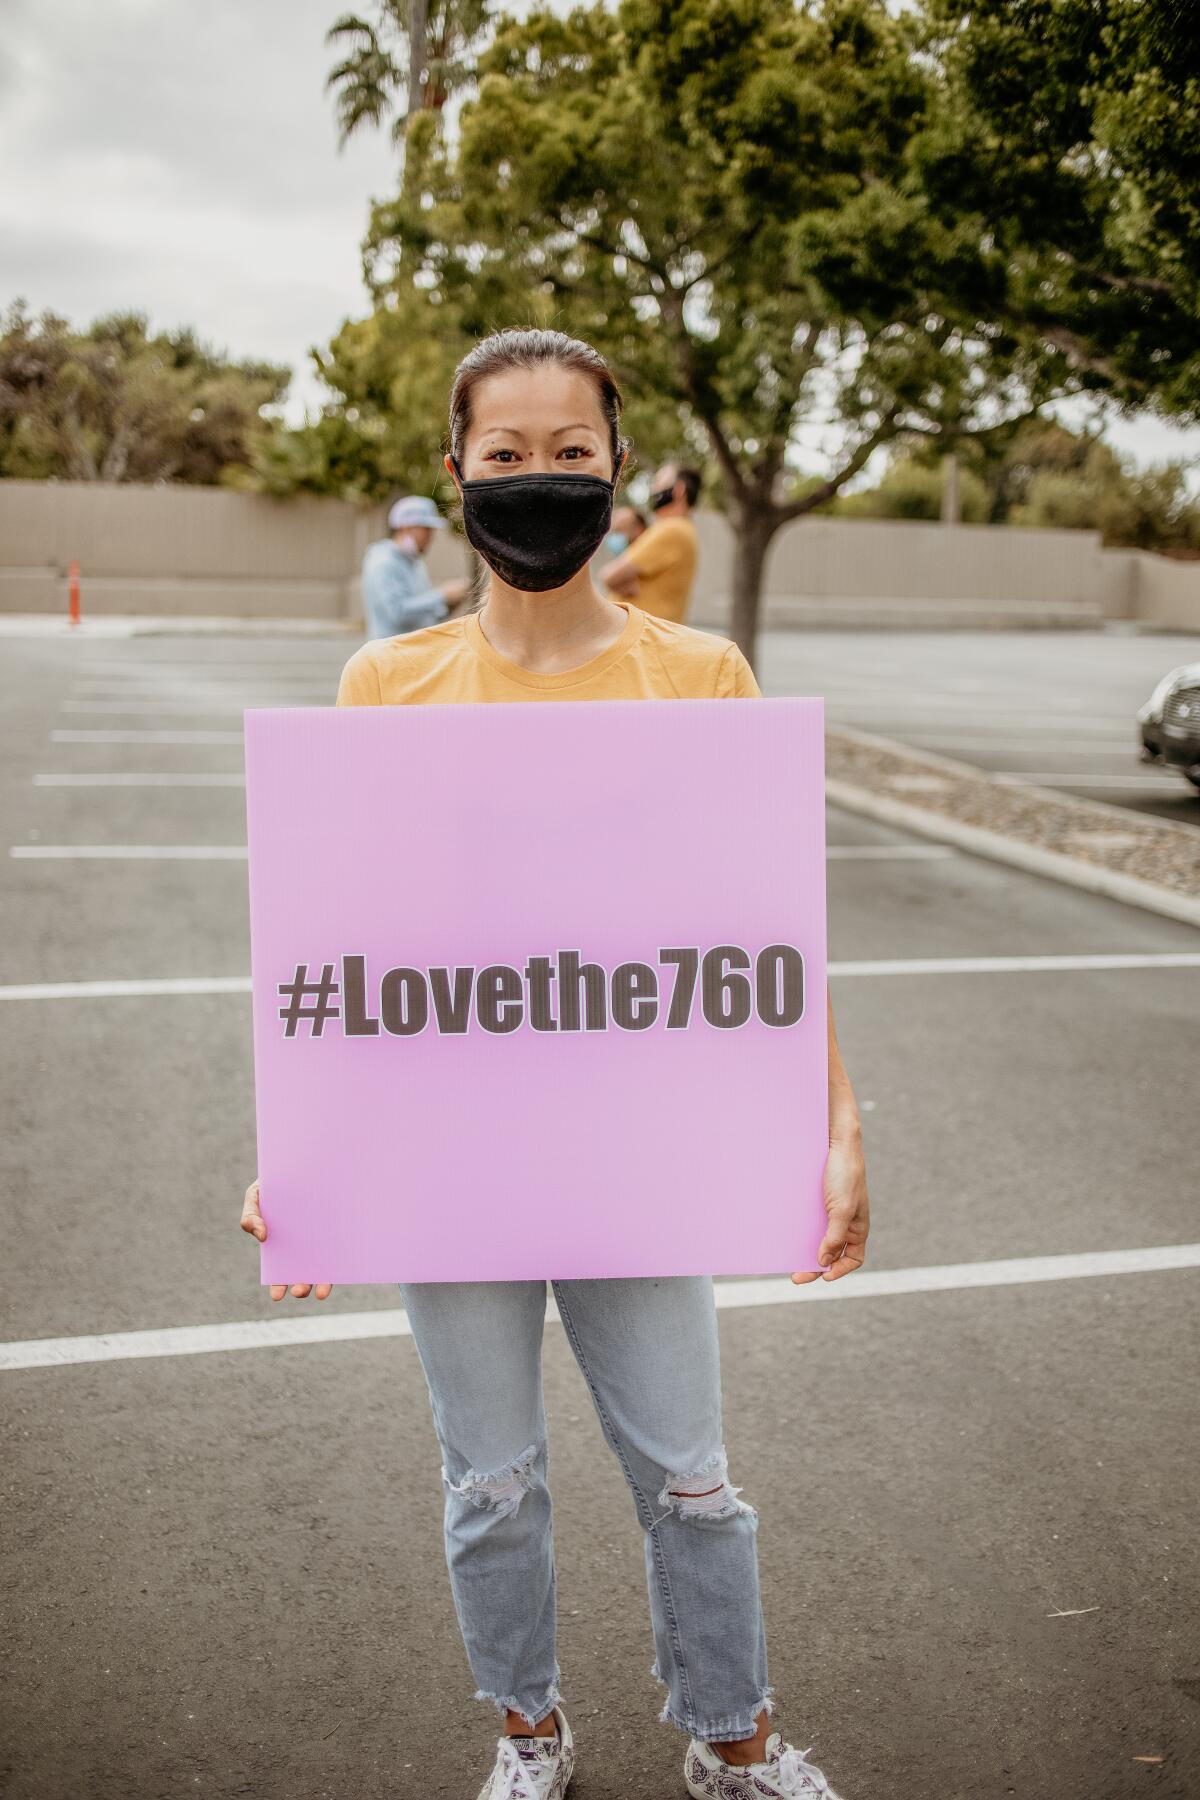 Venture Church's rallying cry has been "Love the 760".